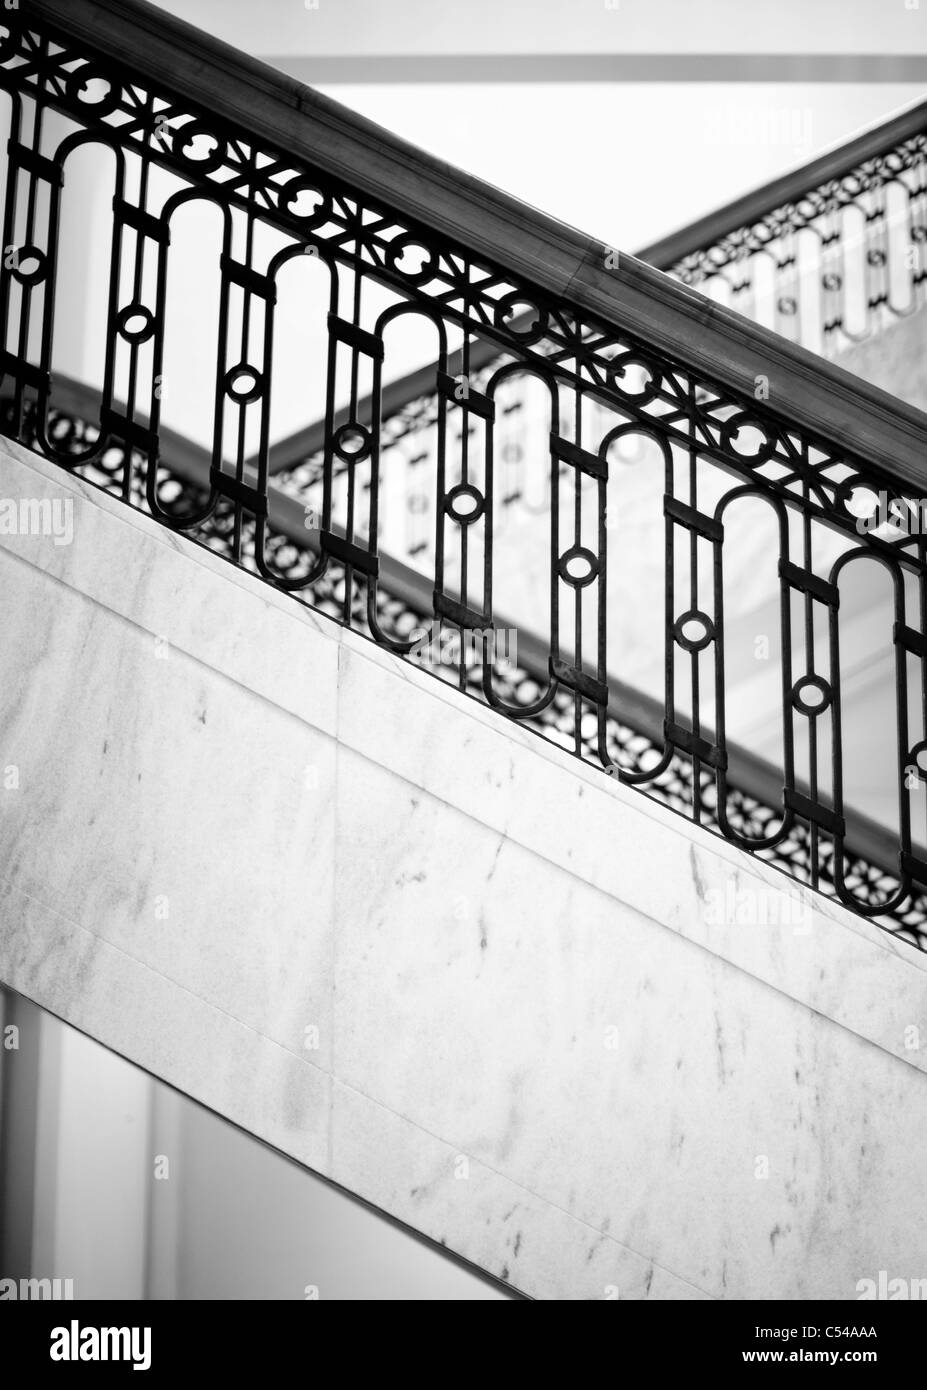 Courthouse Stairs Stock Photo